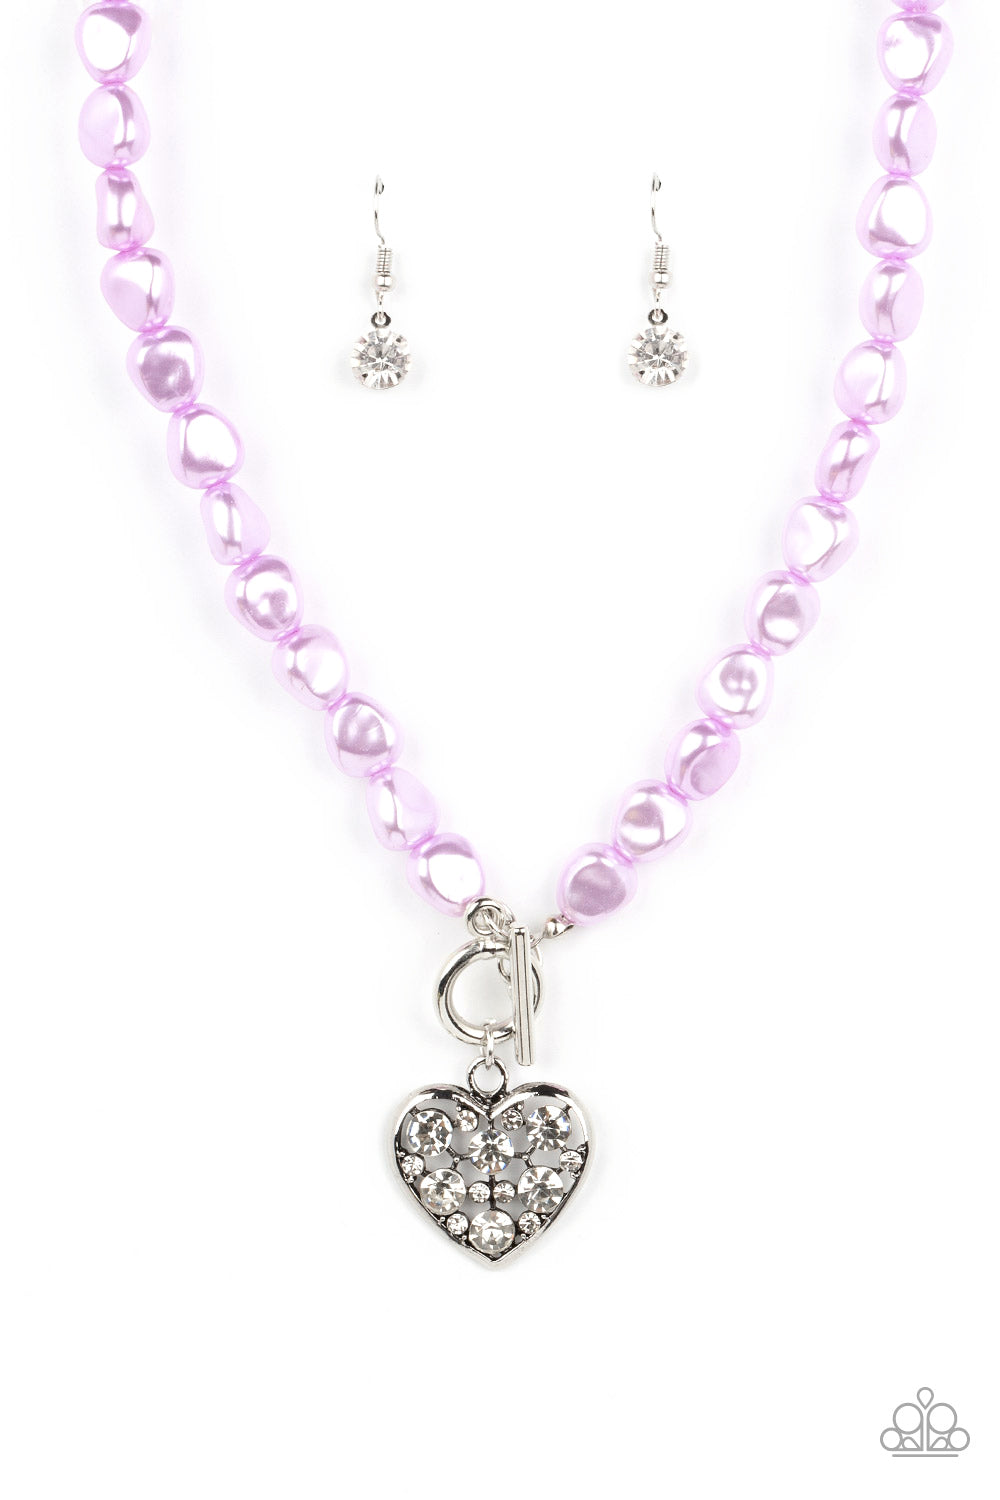 Color Me Smitten - Purple Imperfect Pearls/White Rhinestone Encrusted Heart Pendant Paparazzi Necklace & matching earrings